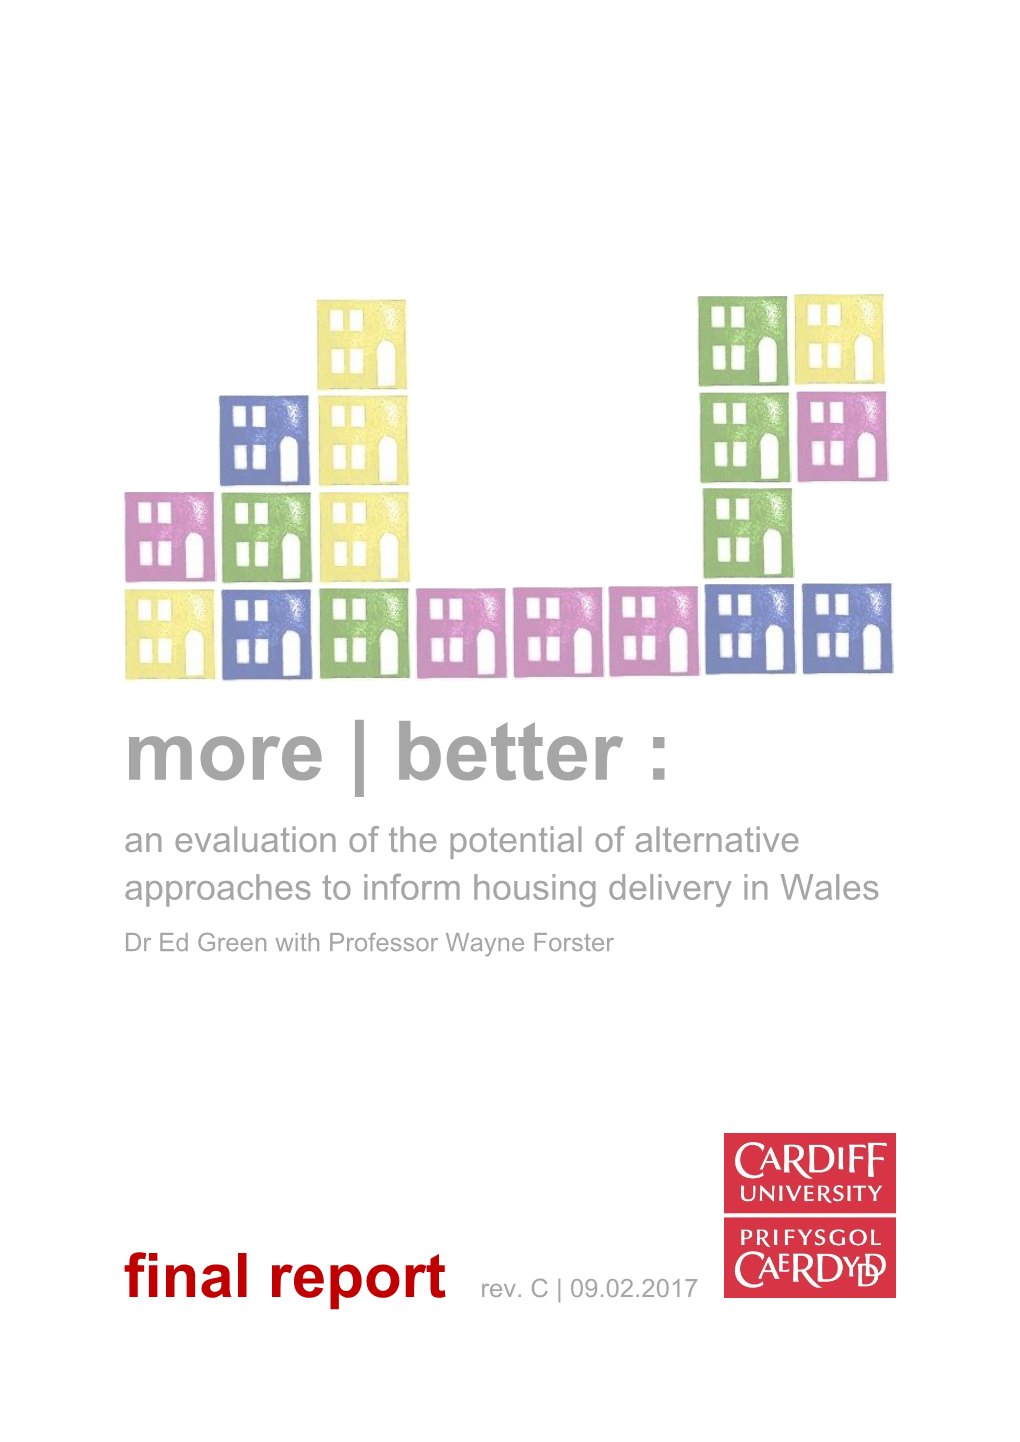 Better : an Evaluation of the Potential of Alternative Approaches to Inform Housing Delivery in Wales Dr Ed Green with Professor Wayne Forster